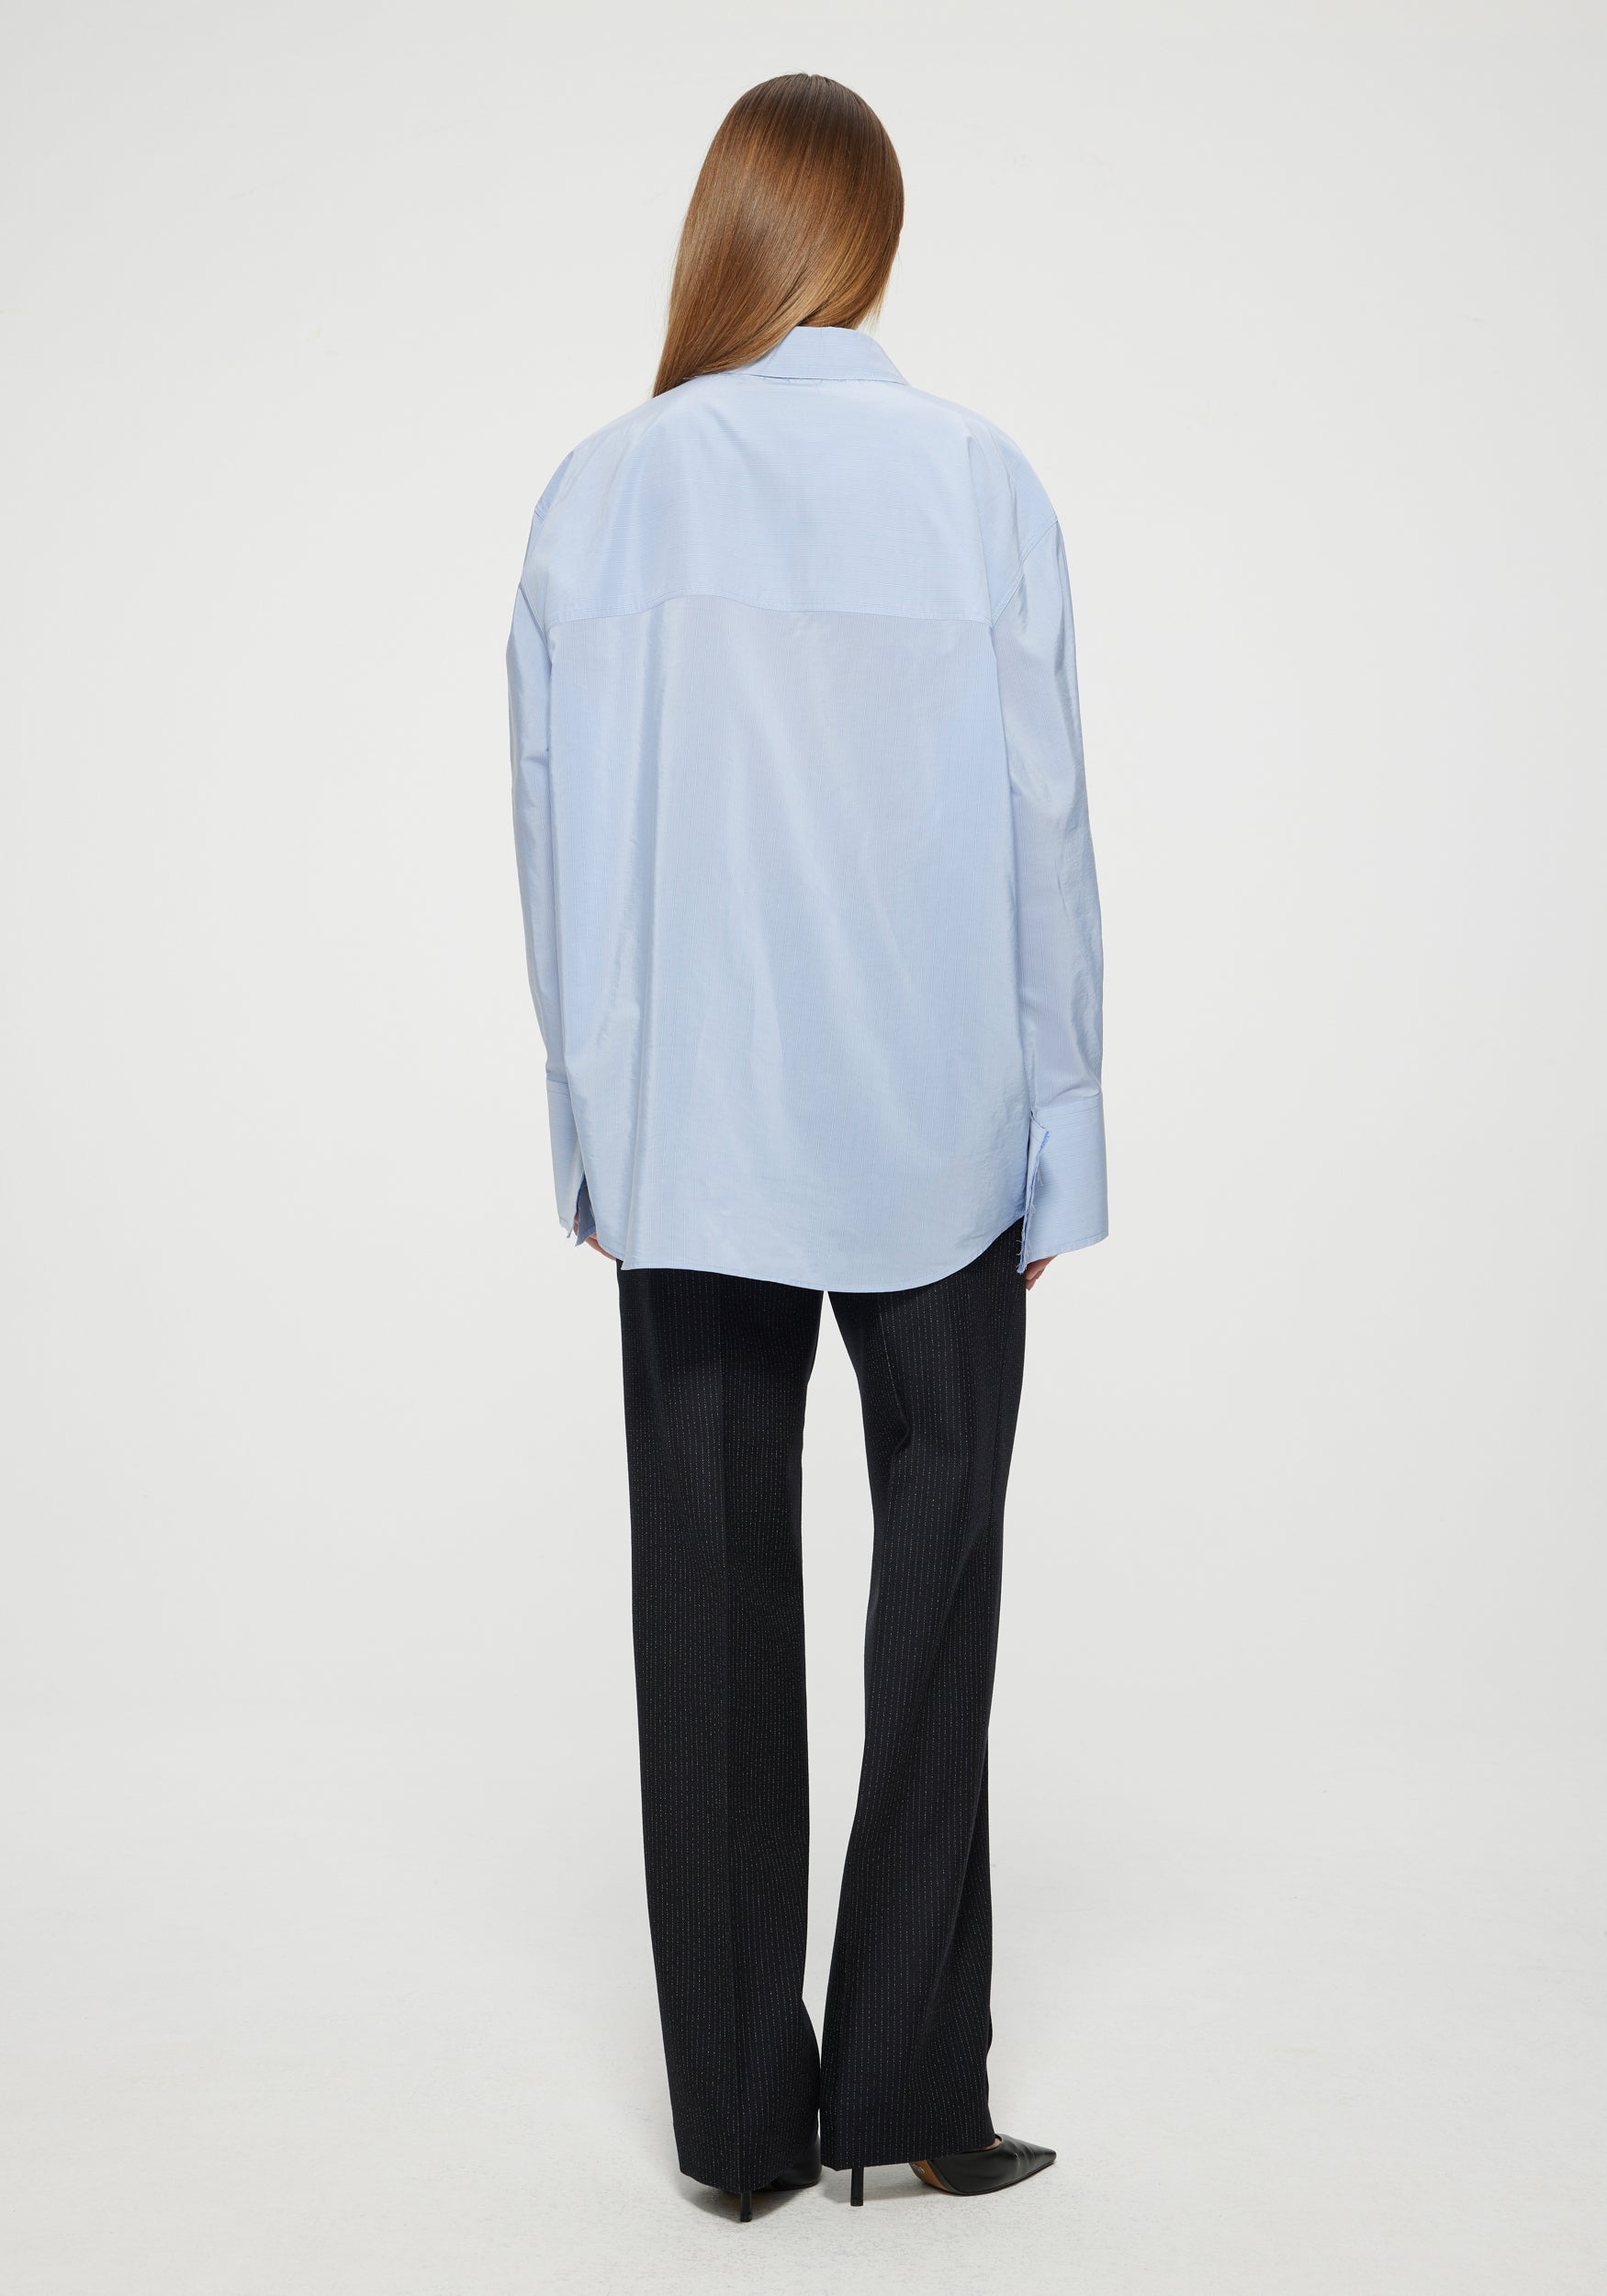 Rohe Fine Striped Shirt in Light Blue available at TNT The New Trend Australia